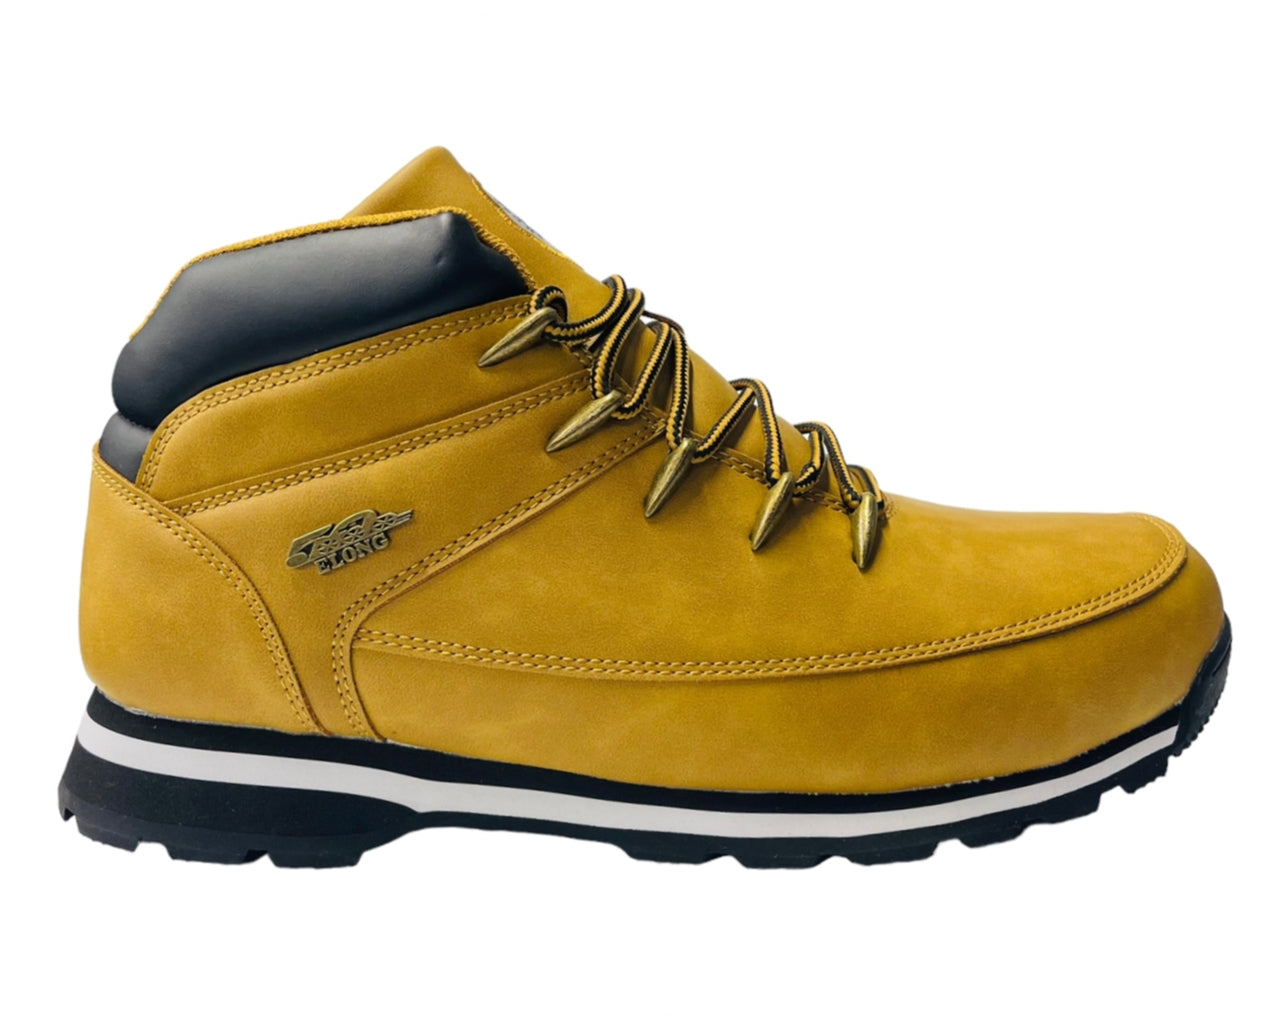 Men's Faux Leather Hiking Boots